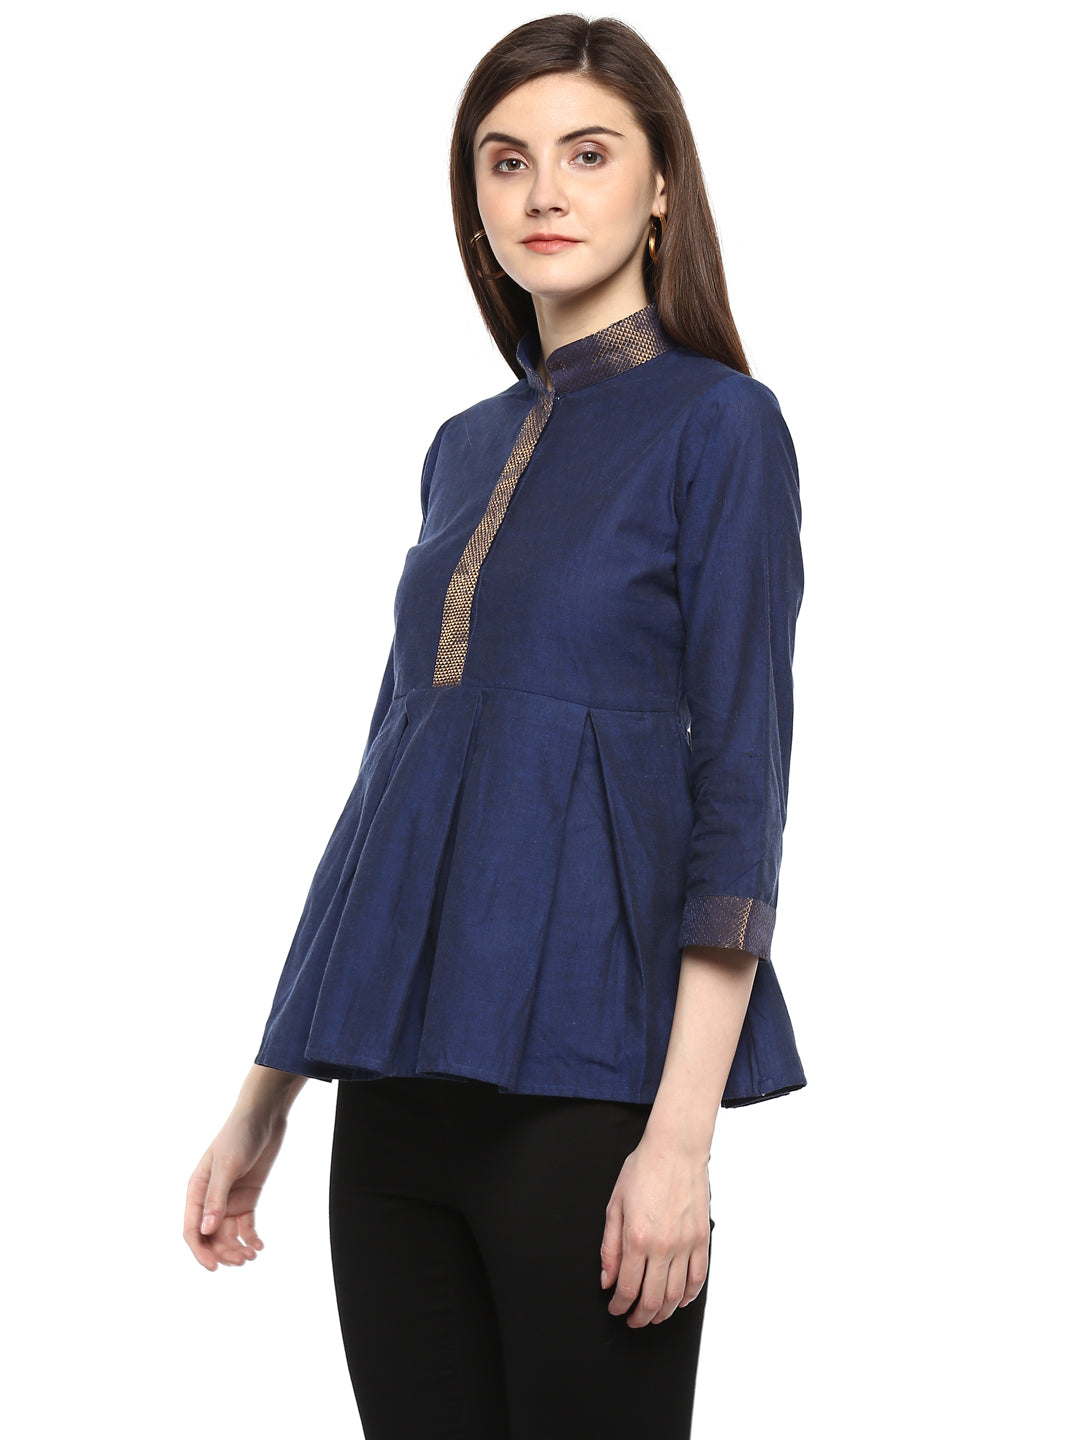 Bhama Couture Navy Blue Solid Cotton Top